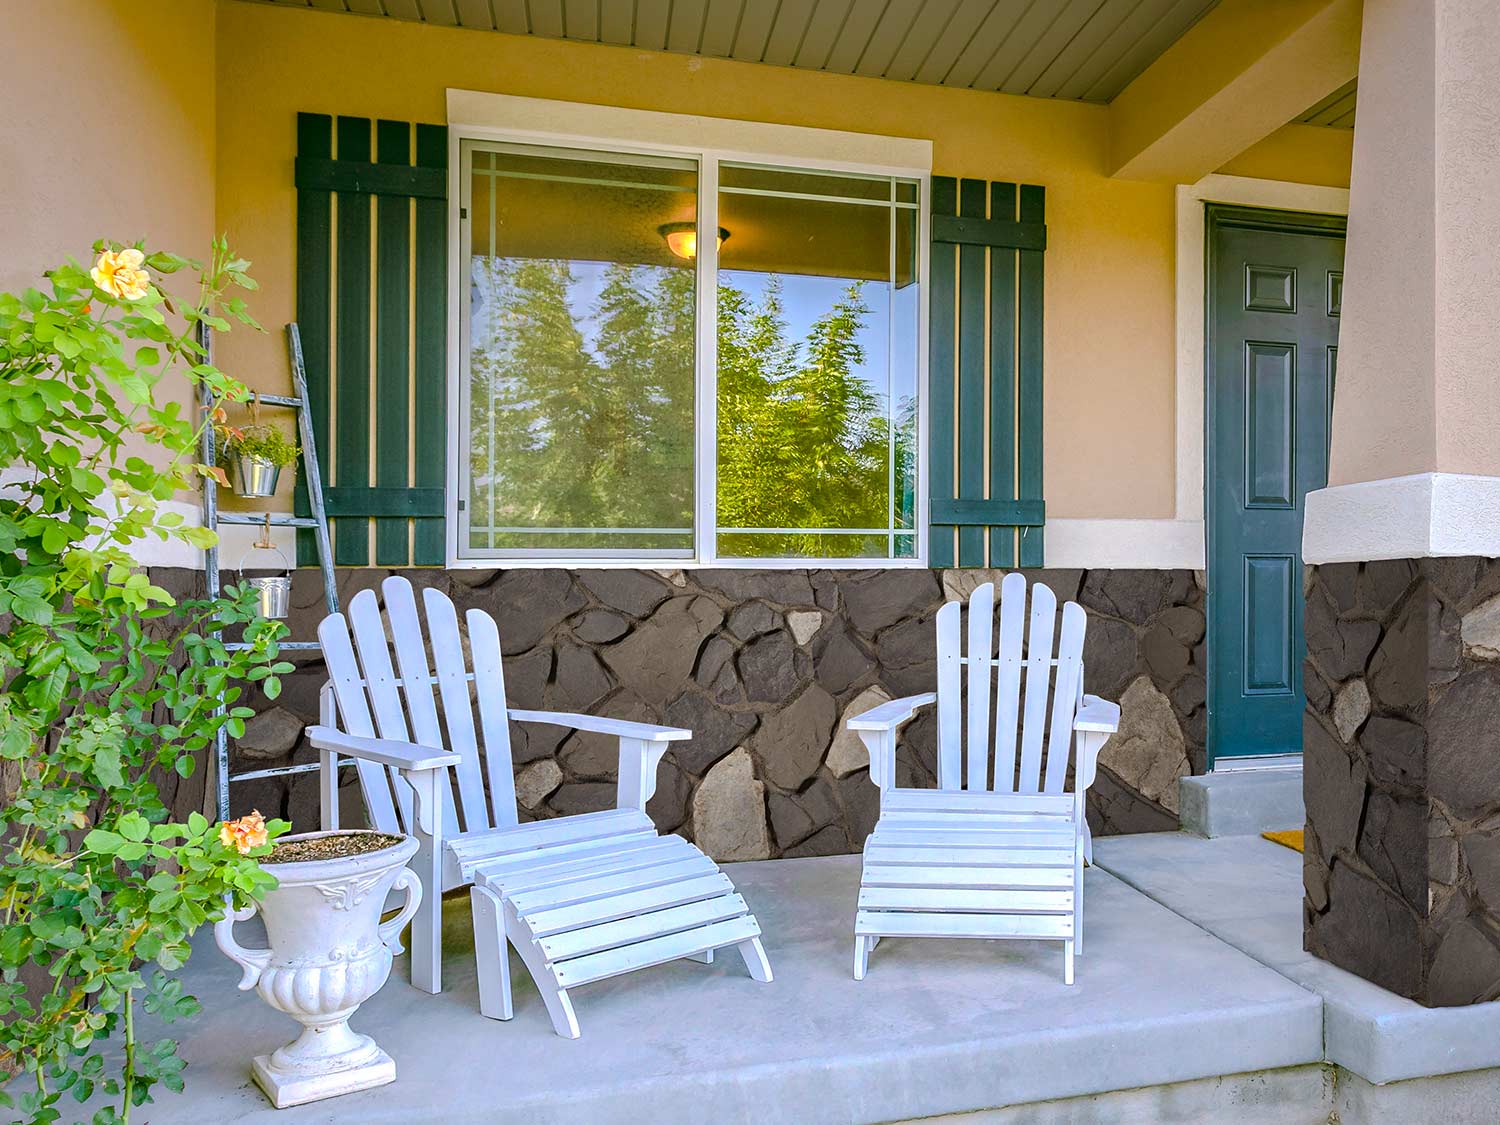 Anson fieldstone creating a cozy and rustic front porch aesthetic